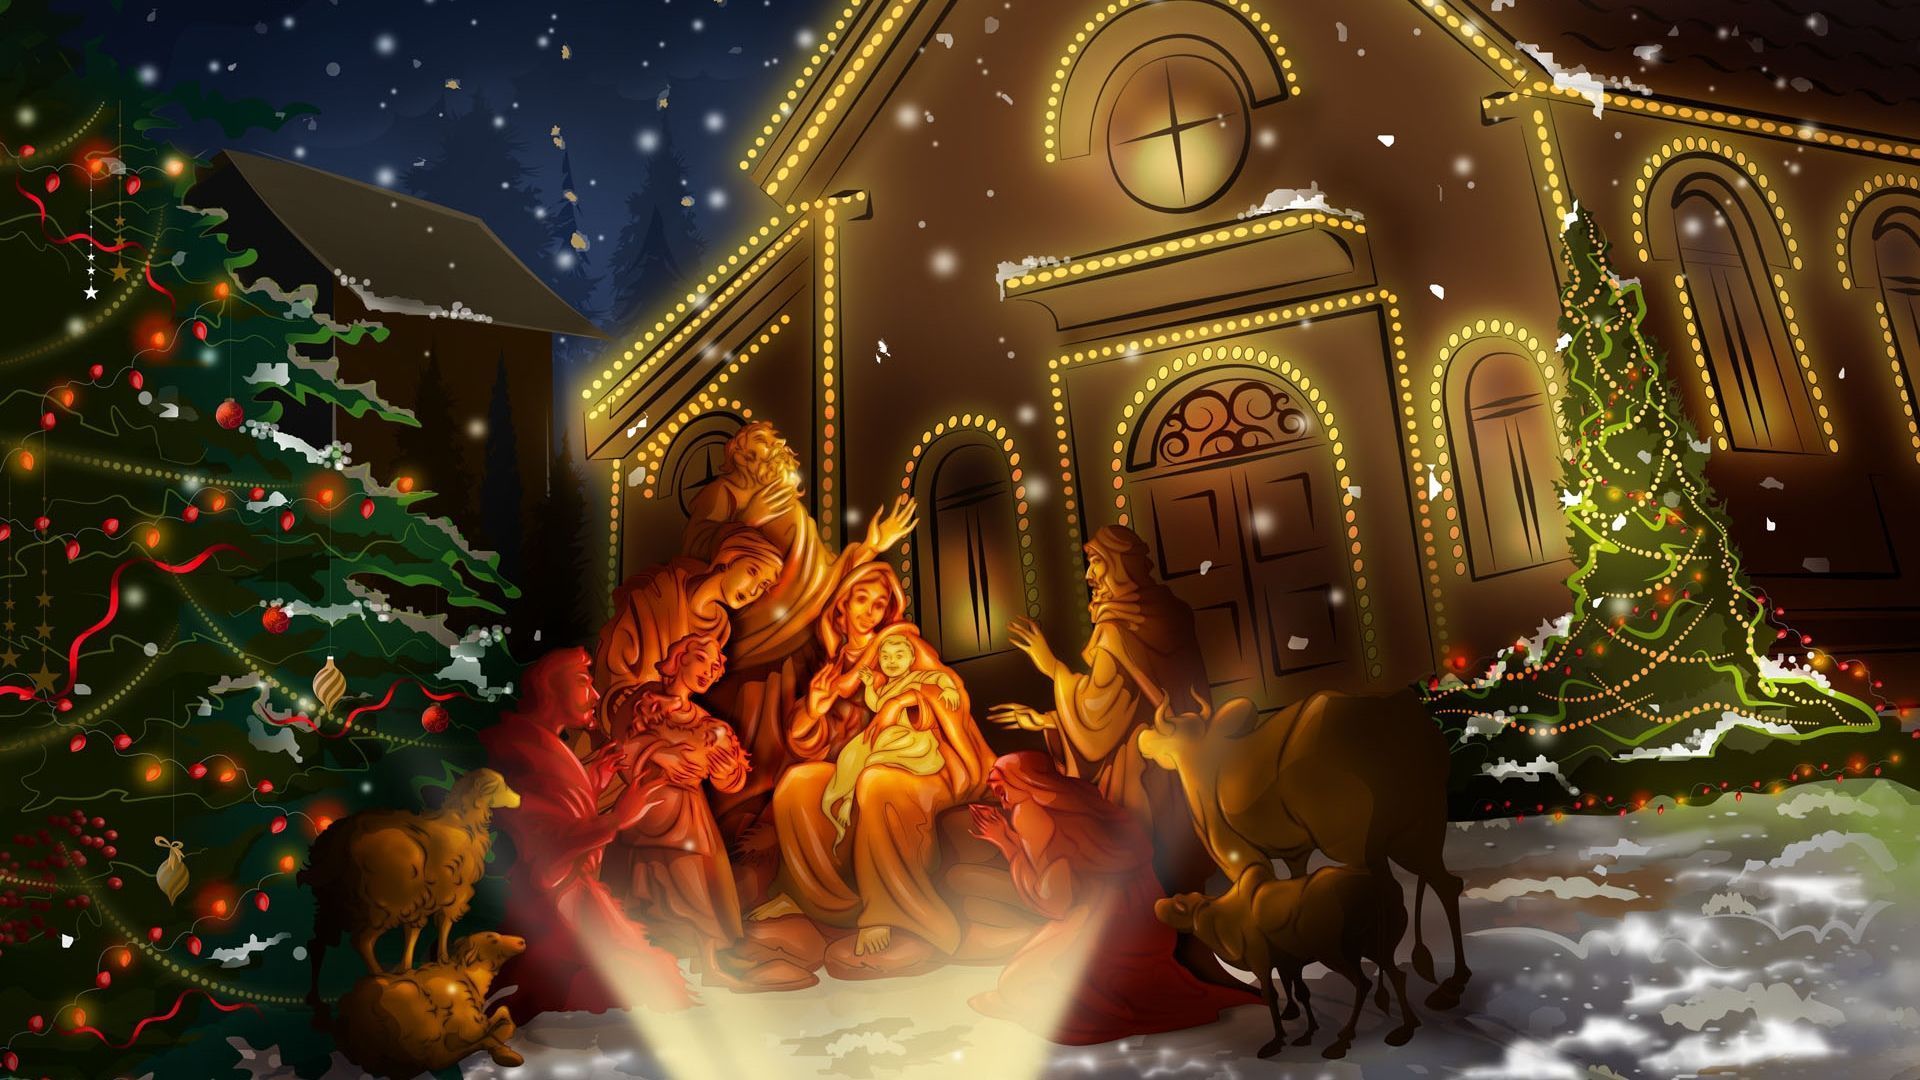 Merry Christmas Latest HD Images - Merry Christmas